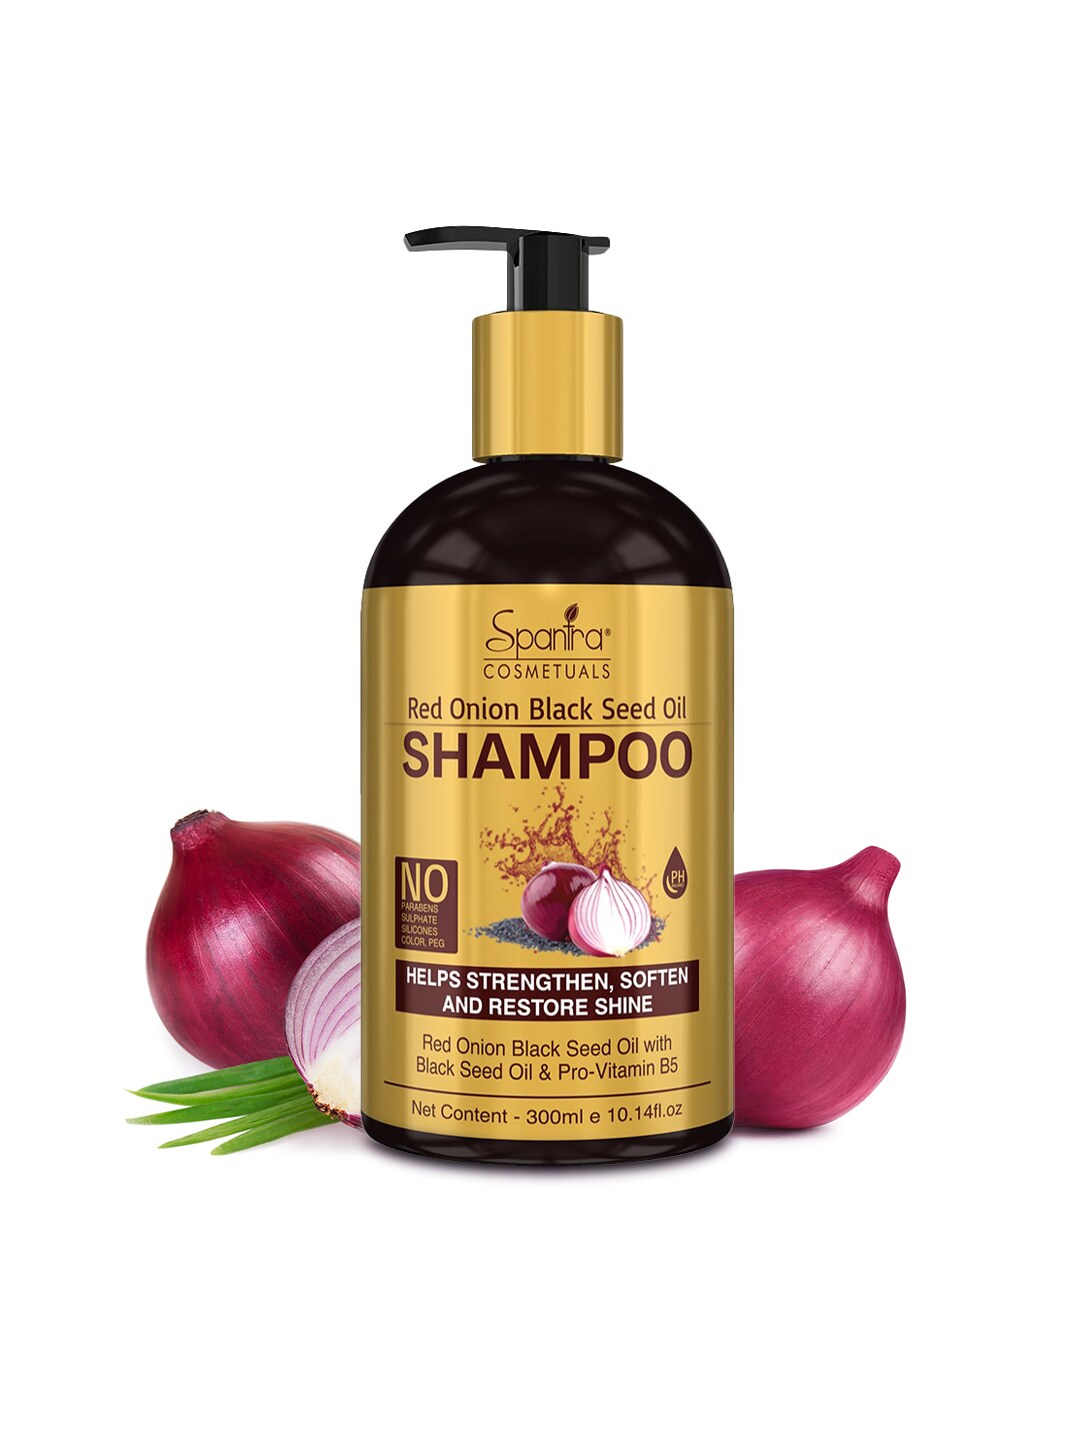 Spantra Red Onion Black Seed Oil Shampoo Helps Strengthen, Soften and Restore Shine, 300ml Price in India